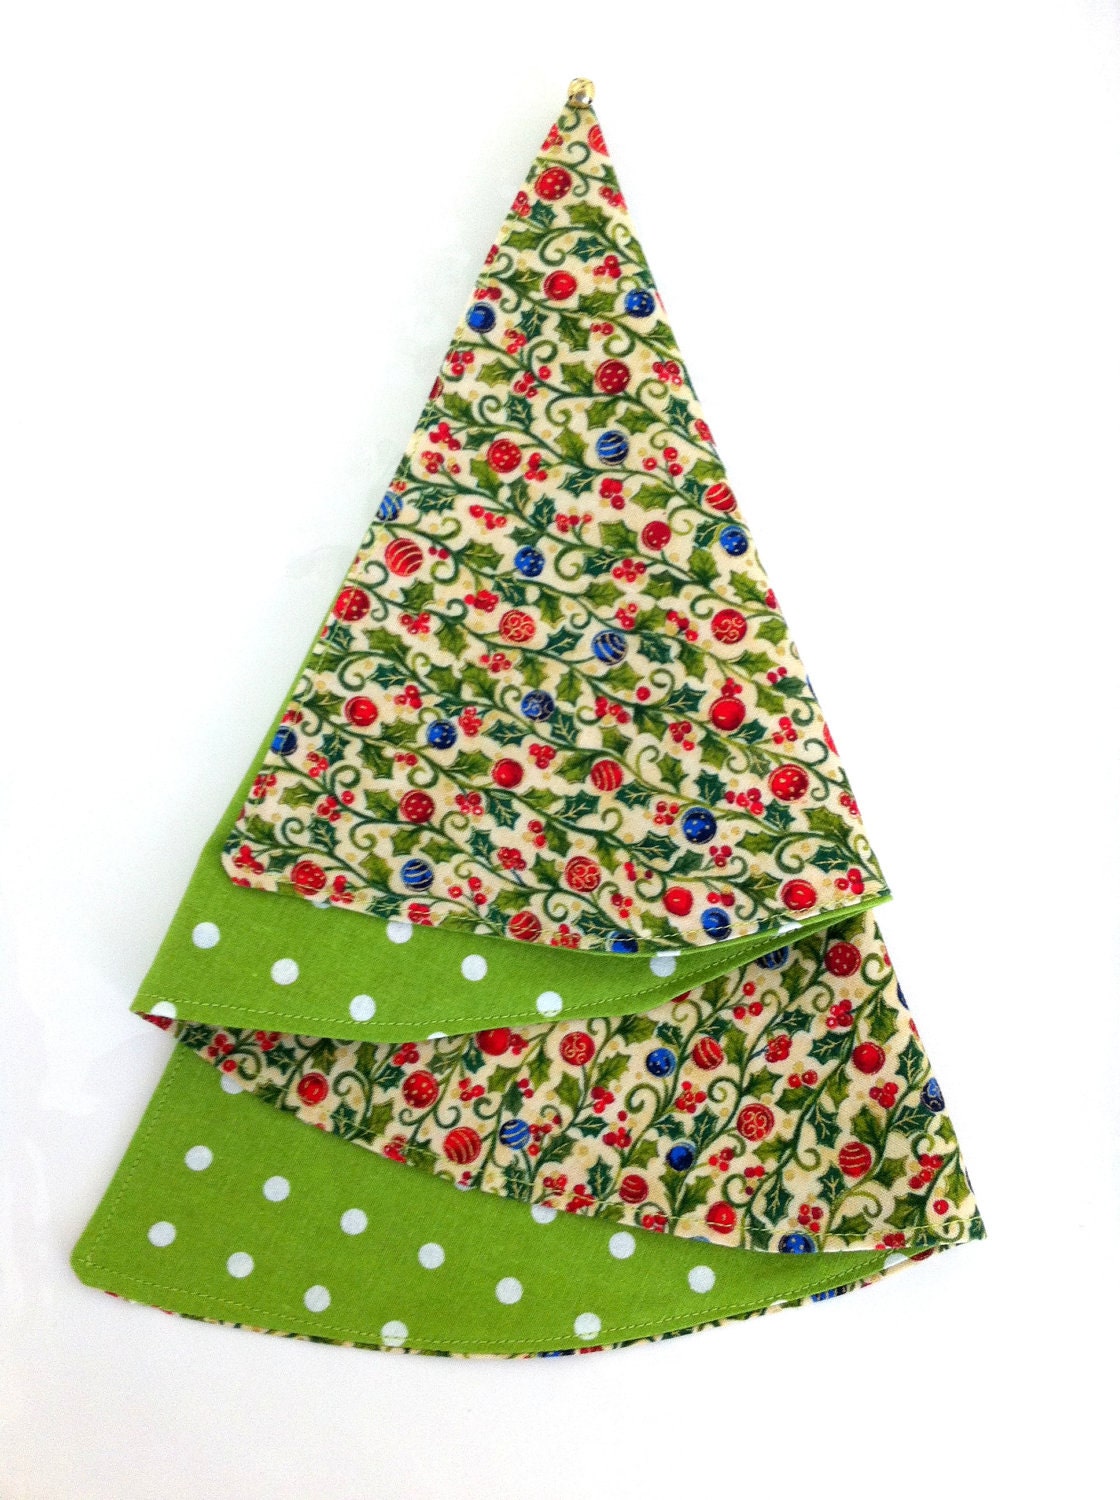 Holiday Fabric Napkins Holly Berries Ornaments Christmas